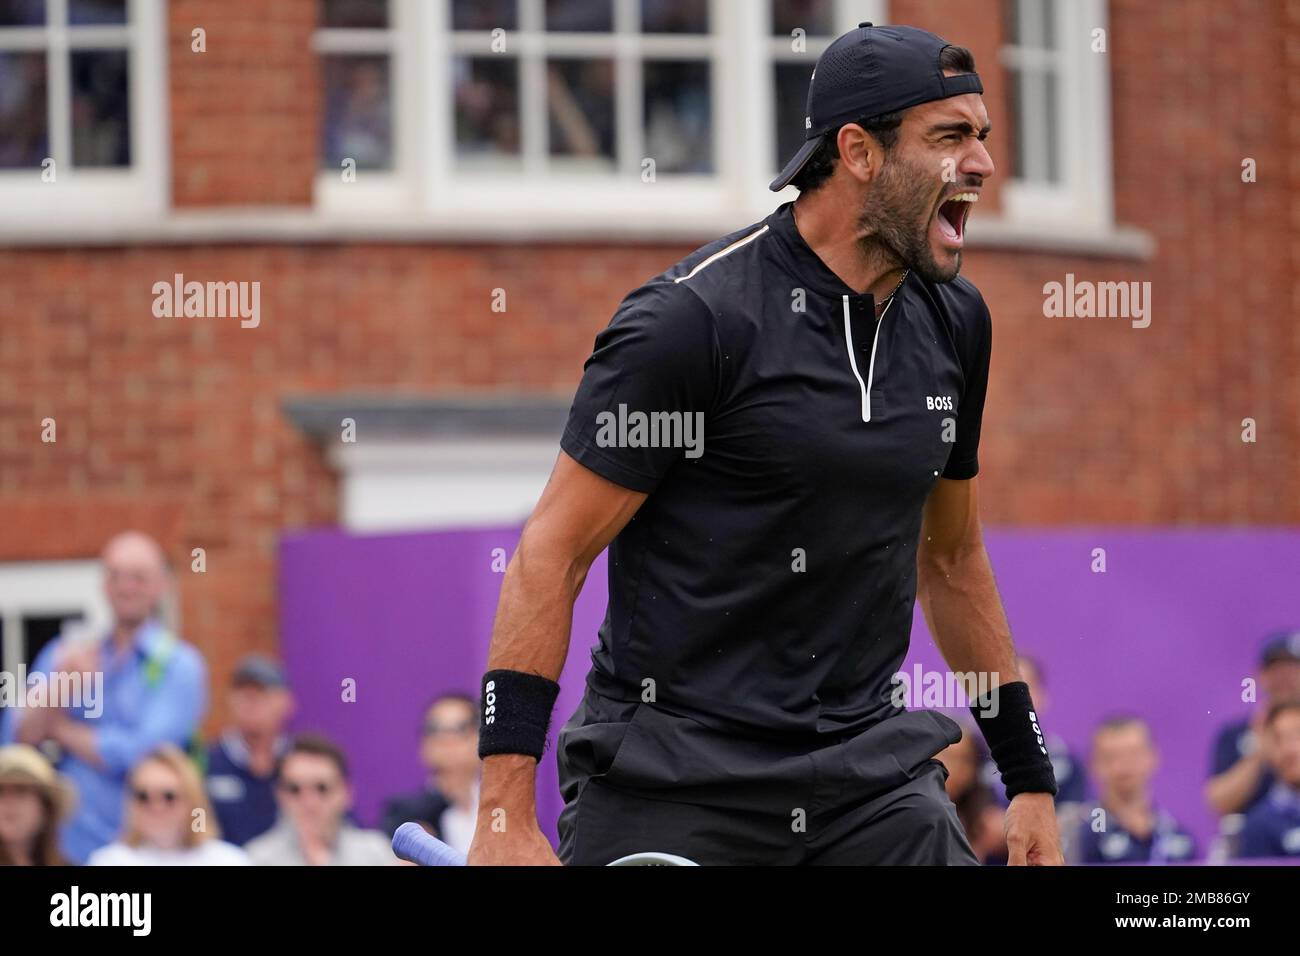 Italys Matteo Berrettini celebrates after beating Botic van de Zandschlup of the Netherlands in a semifinal tennis match at the Queens Club Championships in London, Saturday, June 18, 2022